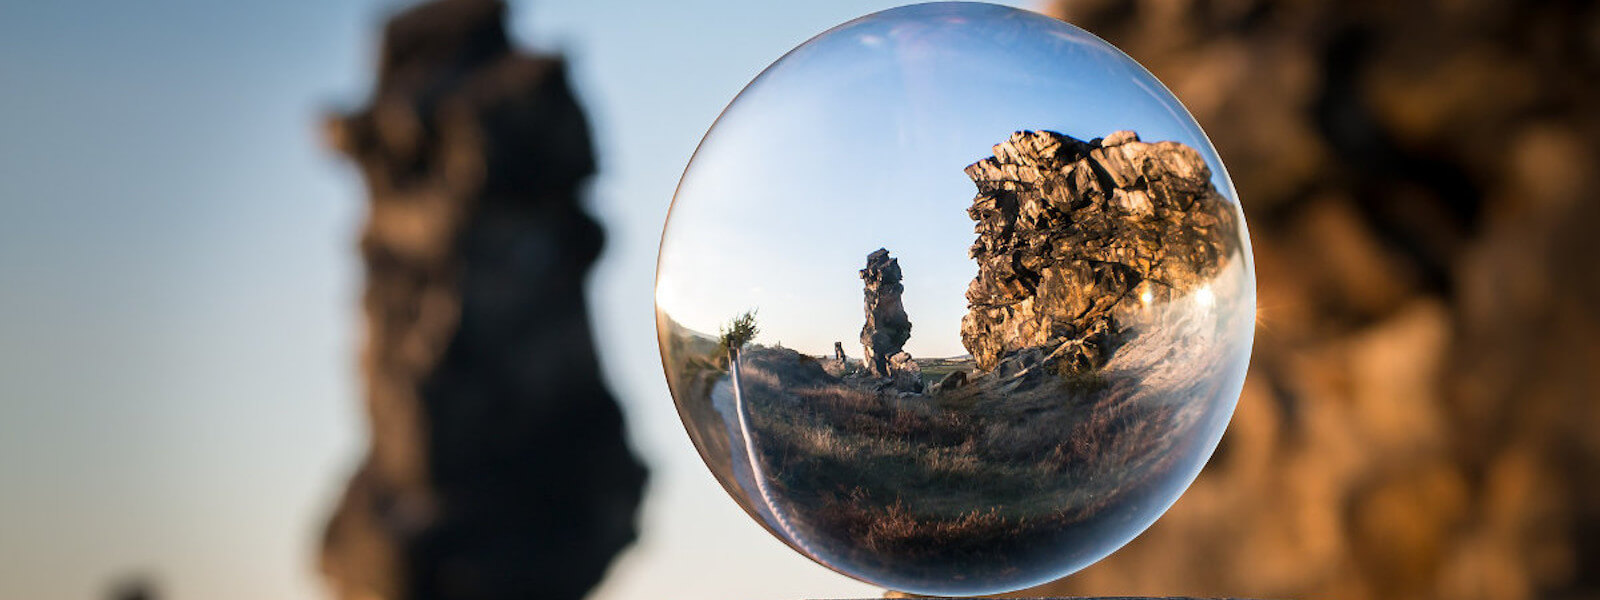 Glass ball reflecting the surrounding cliffs and rocks.